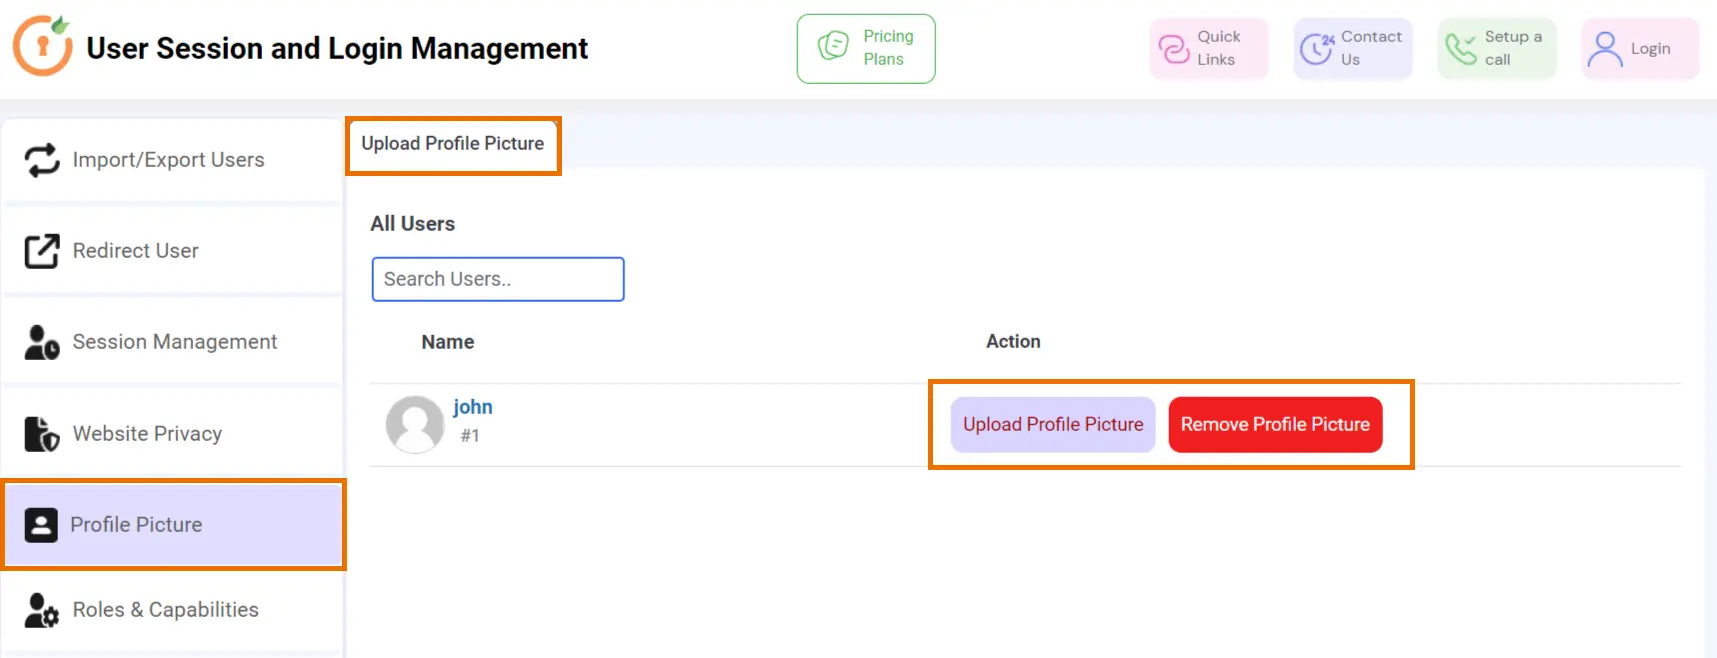 User session and login management Update Profile Picture